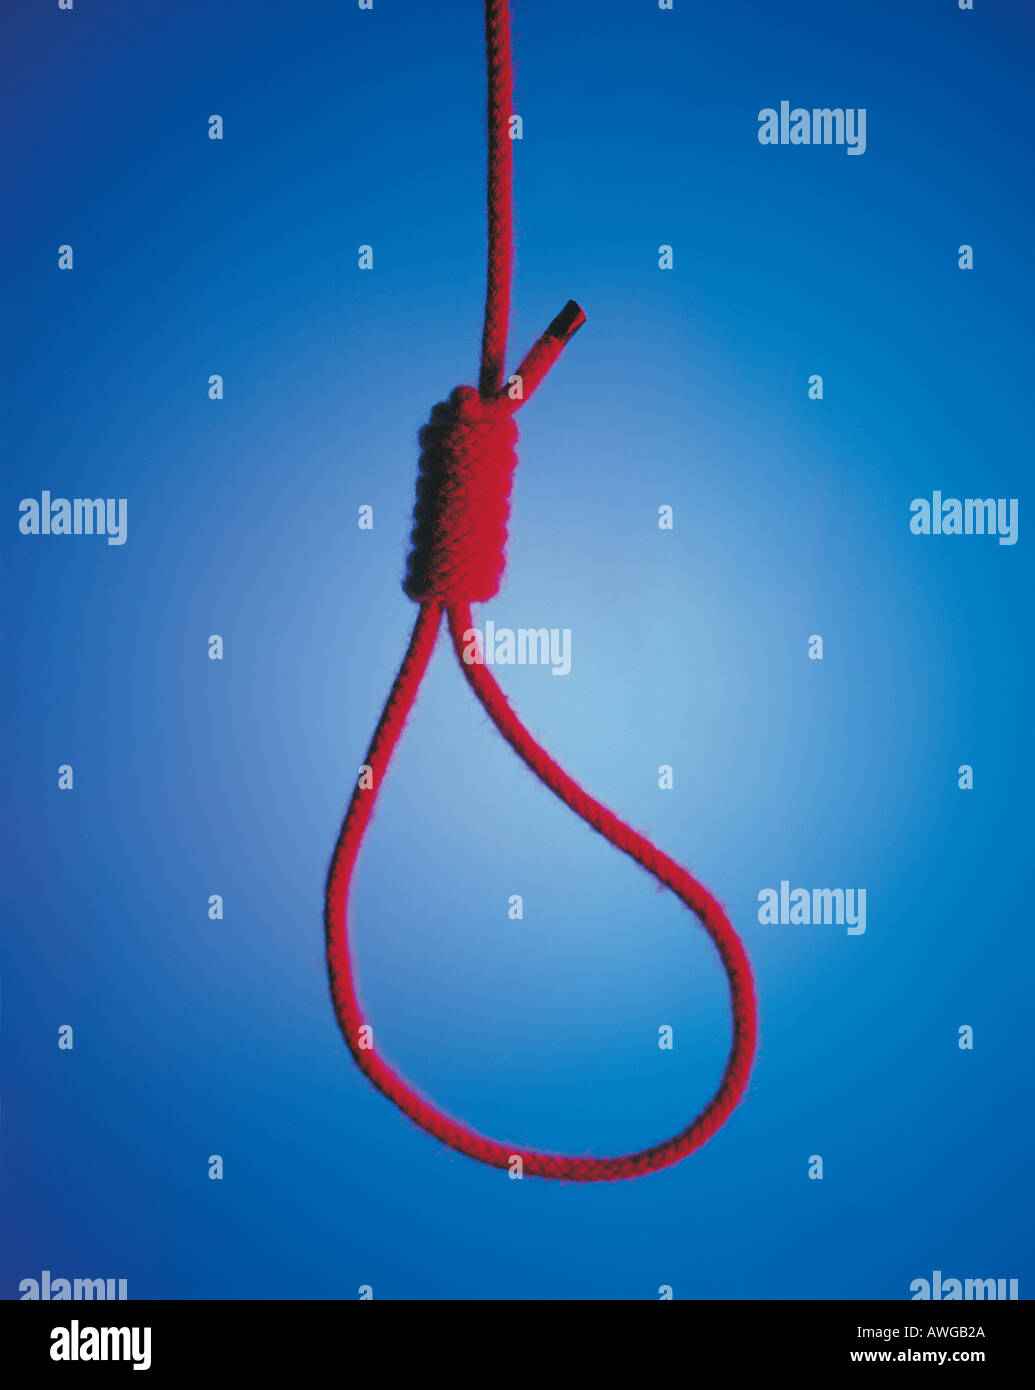 A typical foot snare: One end of a rope is tied to a stone ('trap